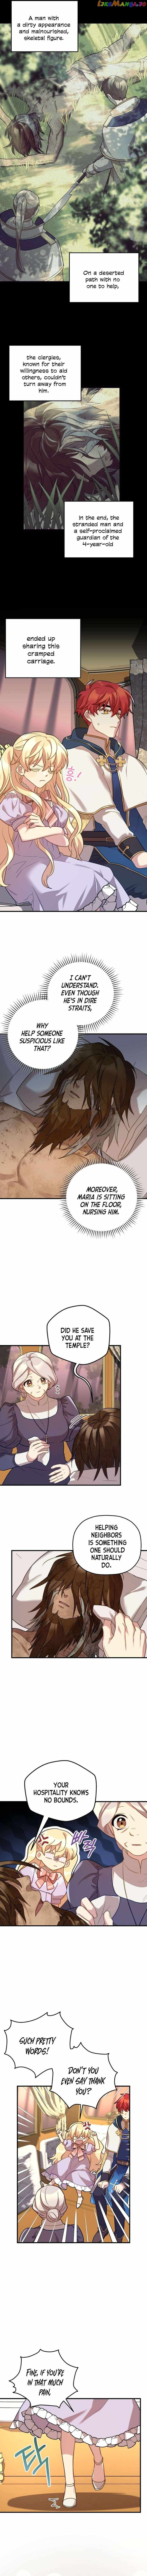 The Baby Saint Wants To Destroy The World! - Page 2